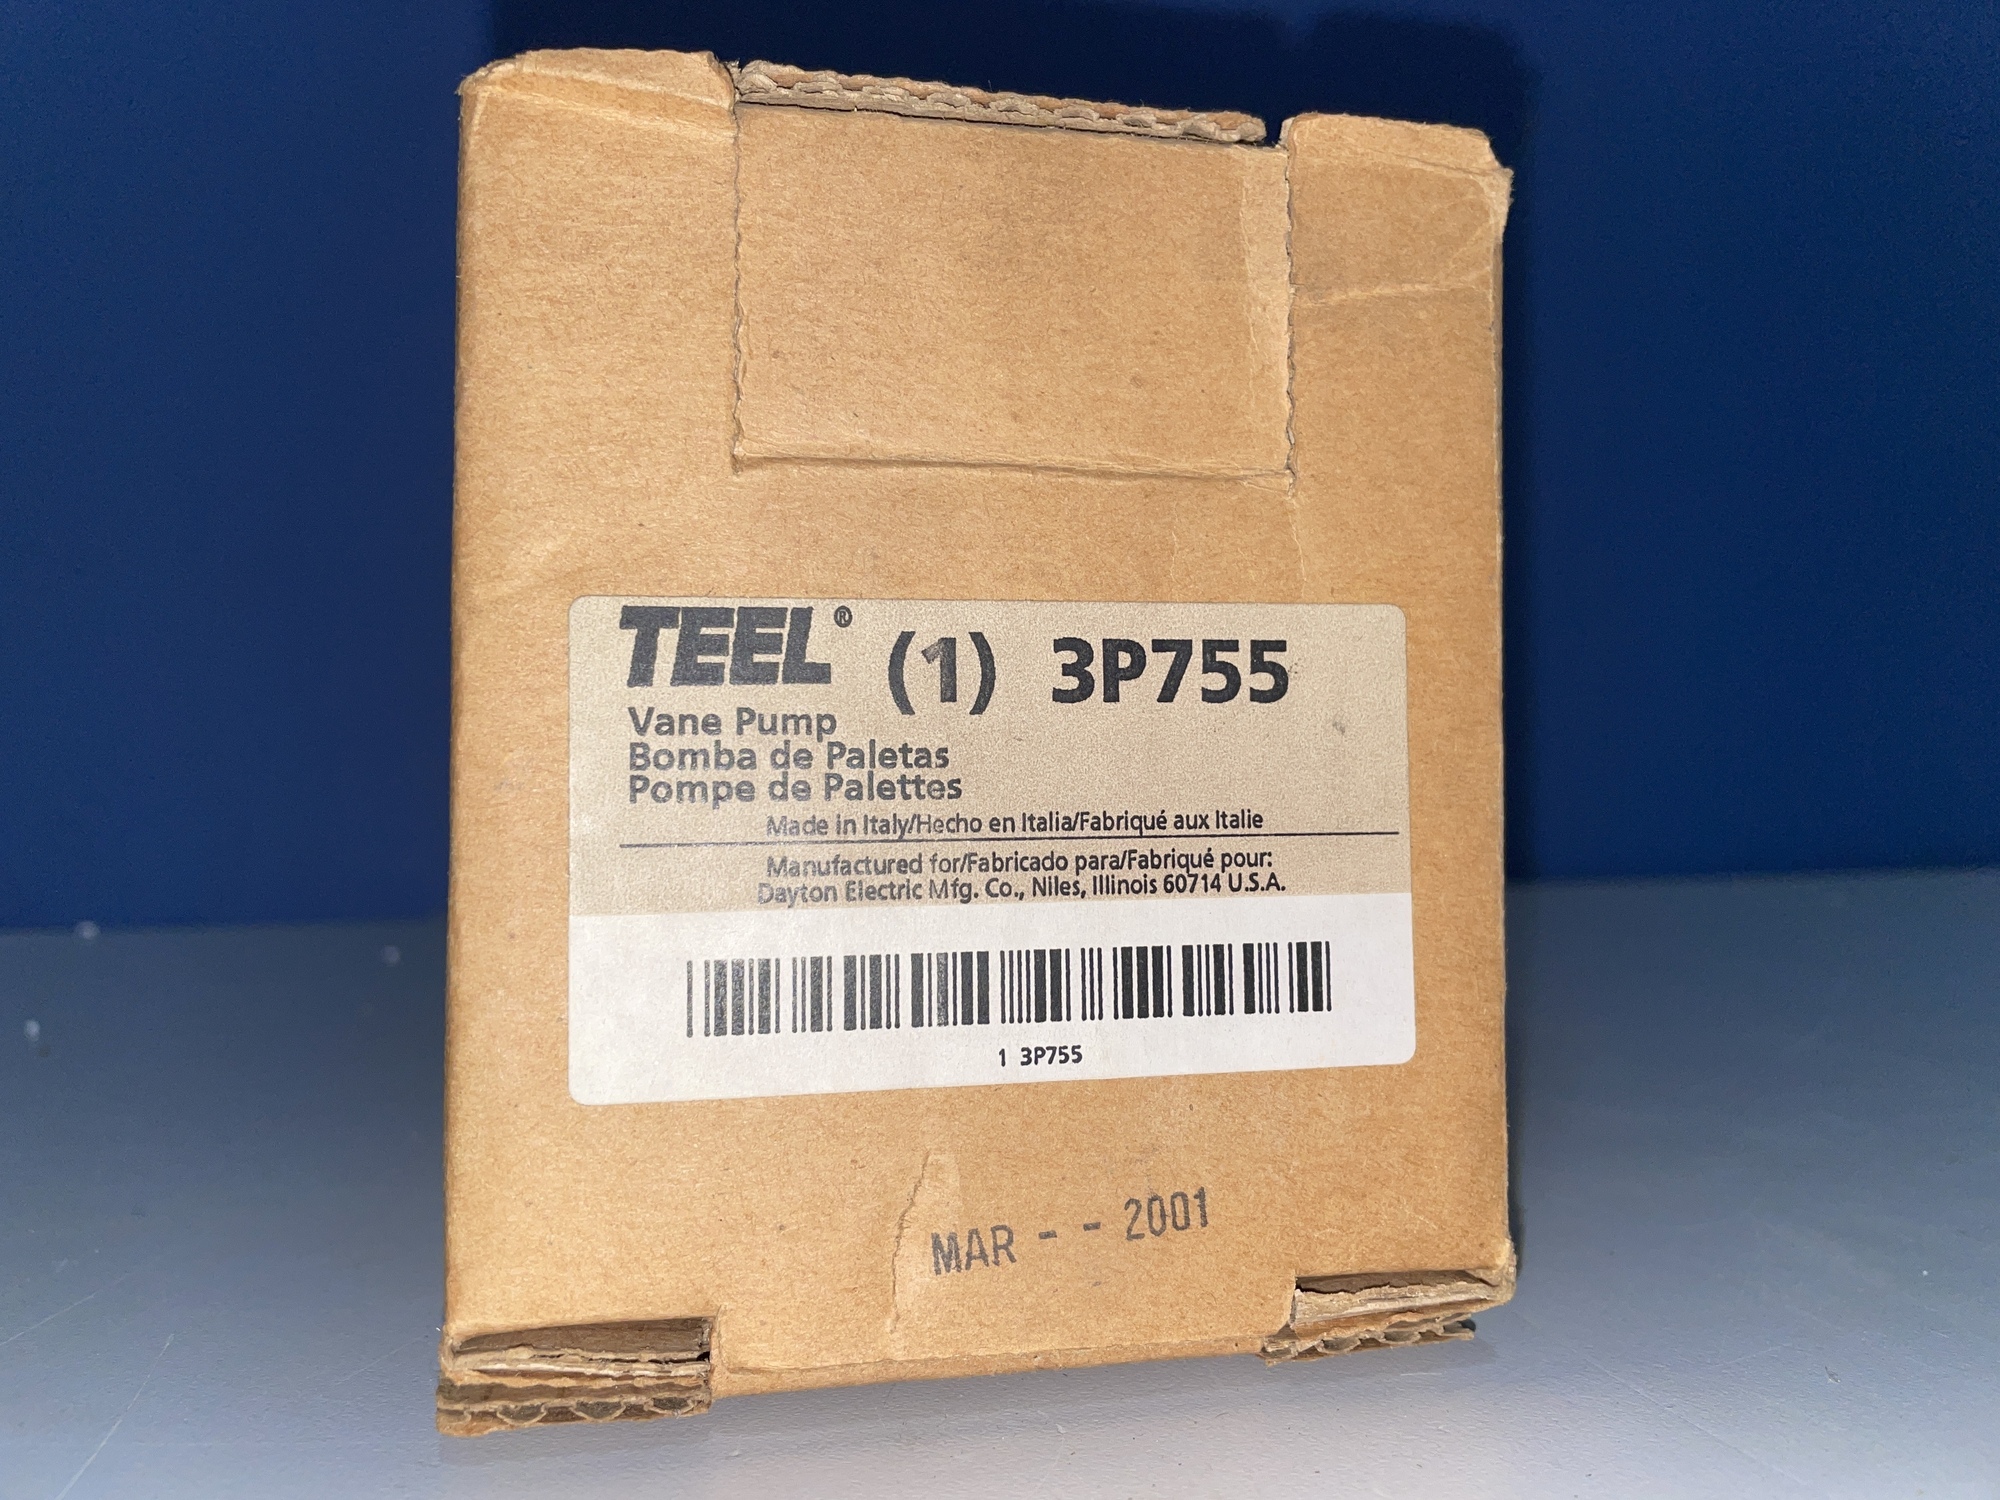 2001 TEEL 3P755 Coolant Systems, Pumps | New England Industrial Machinery